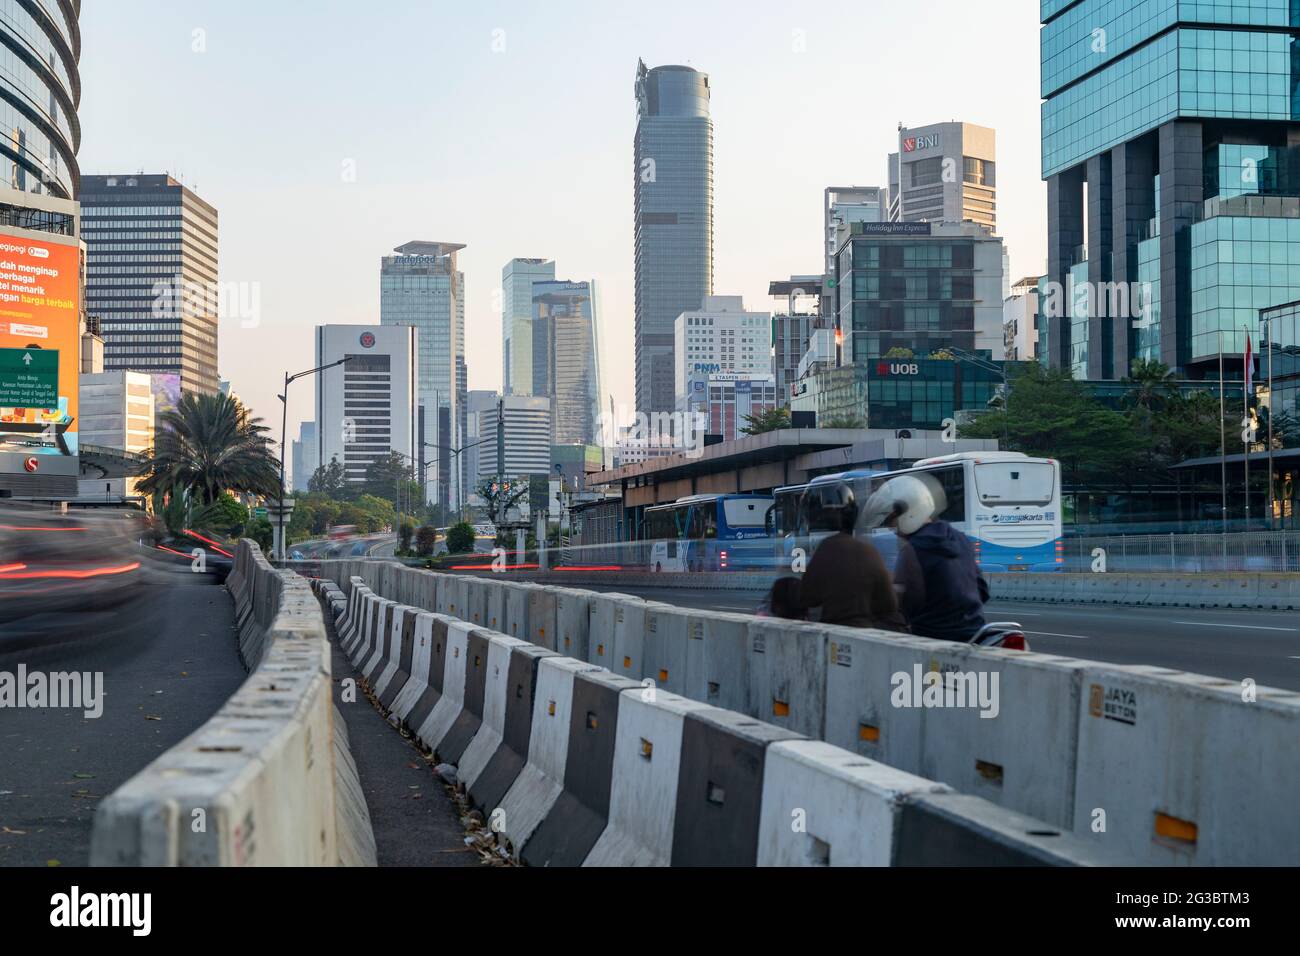 Jakarta, Indonesia - Oct 20, 2019: Skyline of skyscrapers in Jakarta and bus and motorcycle traffic on Jend Sudirman street Stock Photo